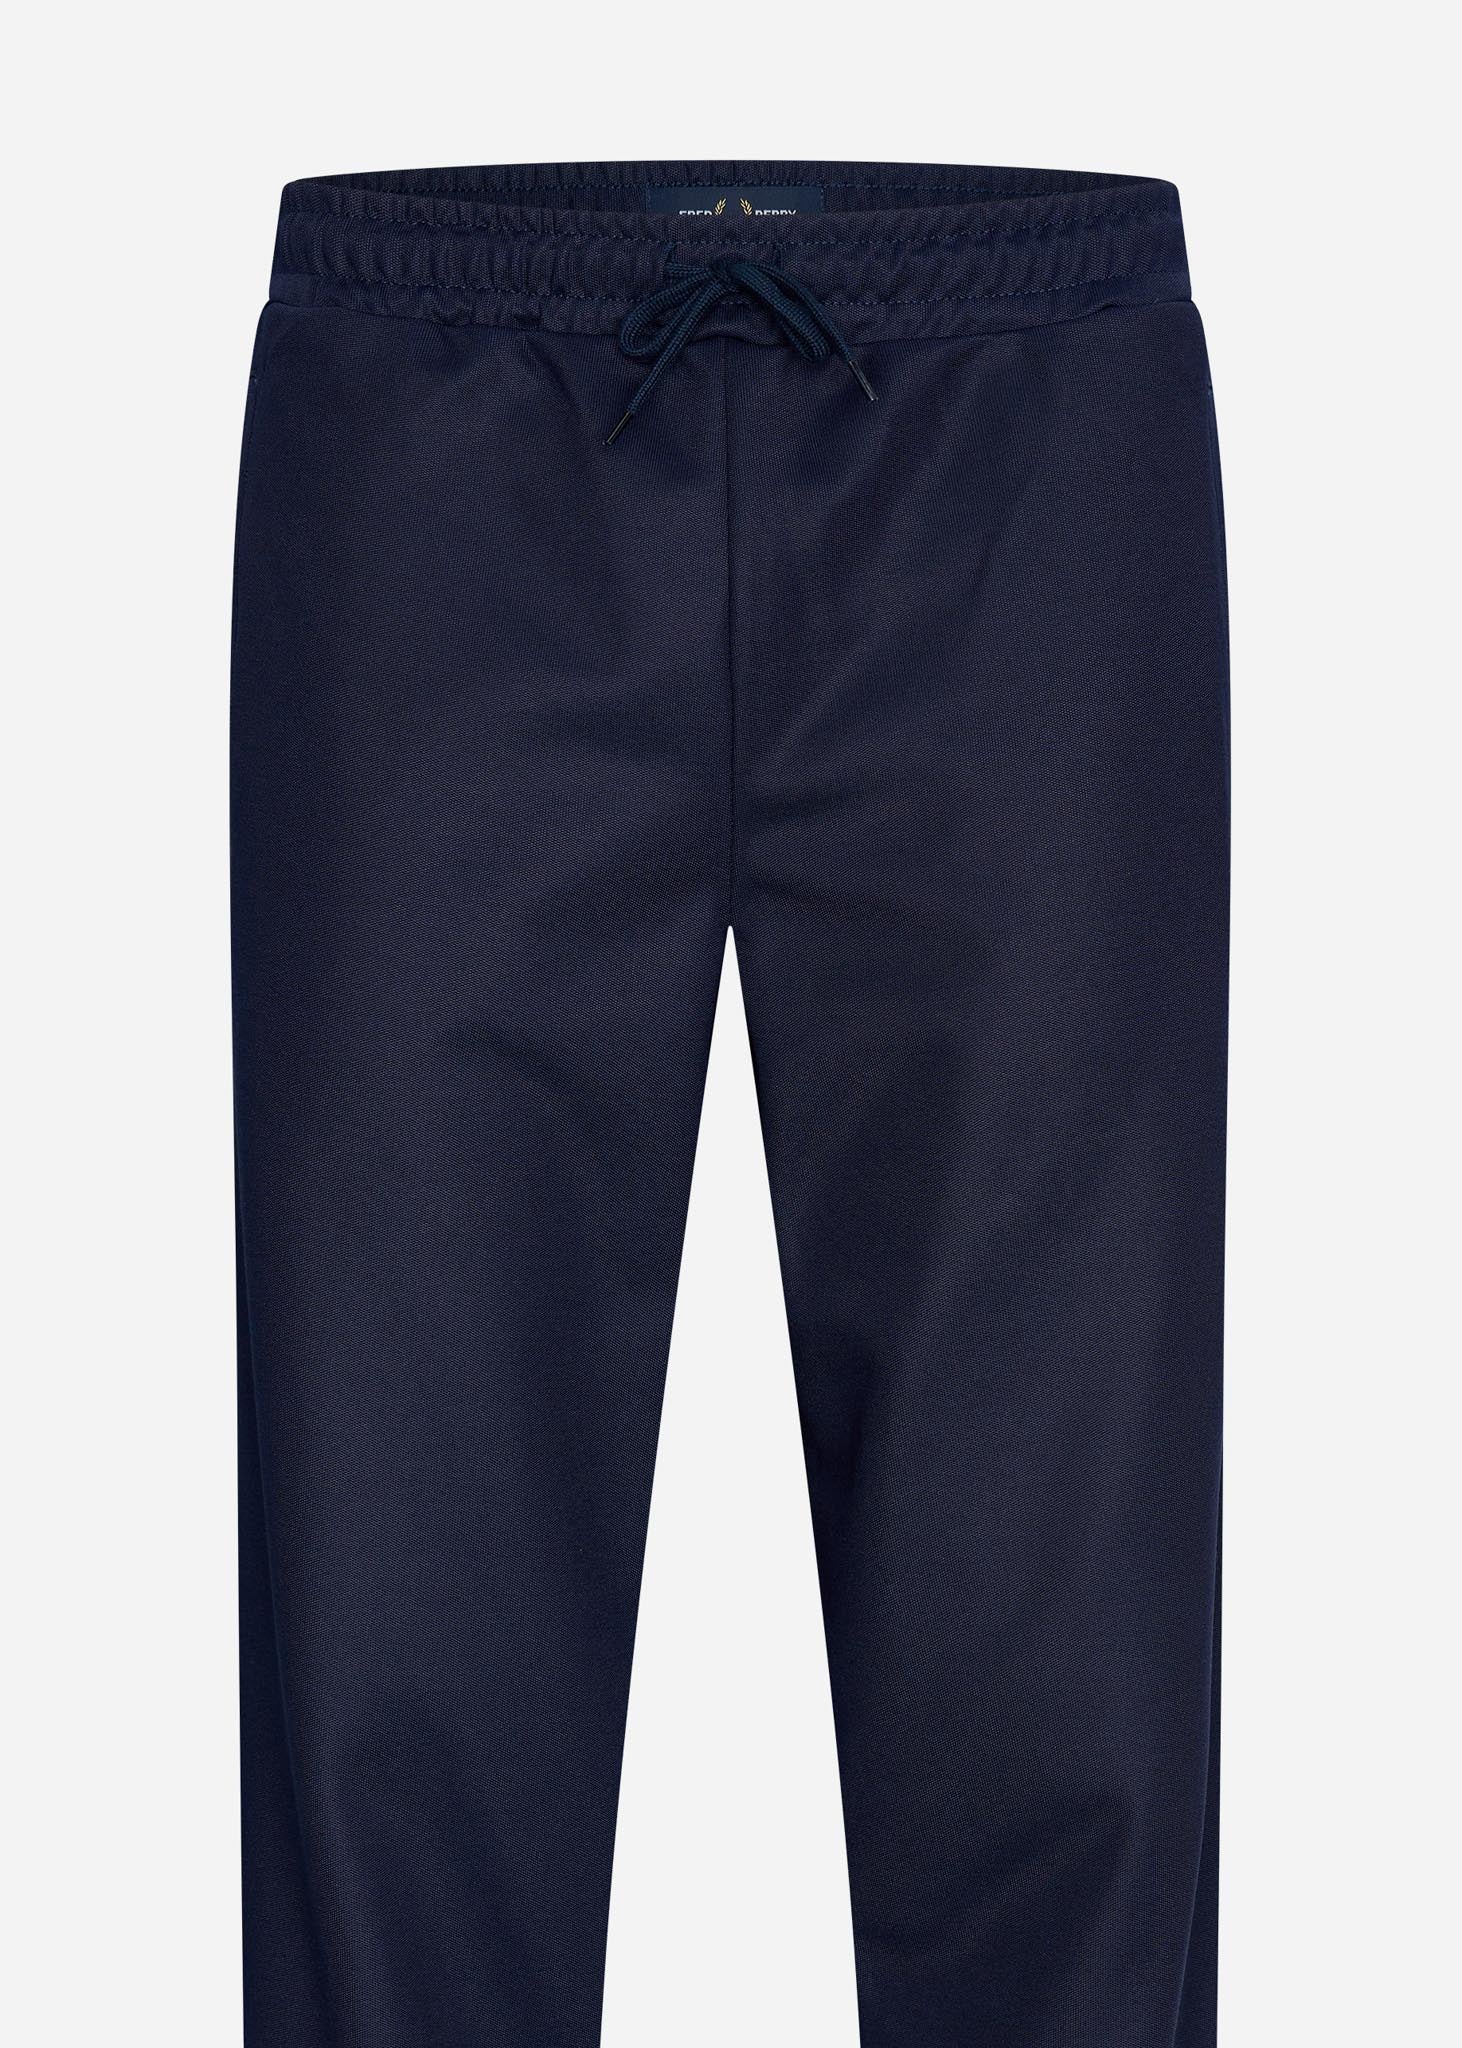 Fred Perry track pant carbon blue